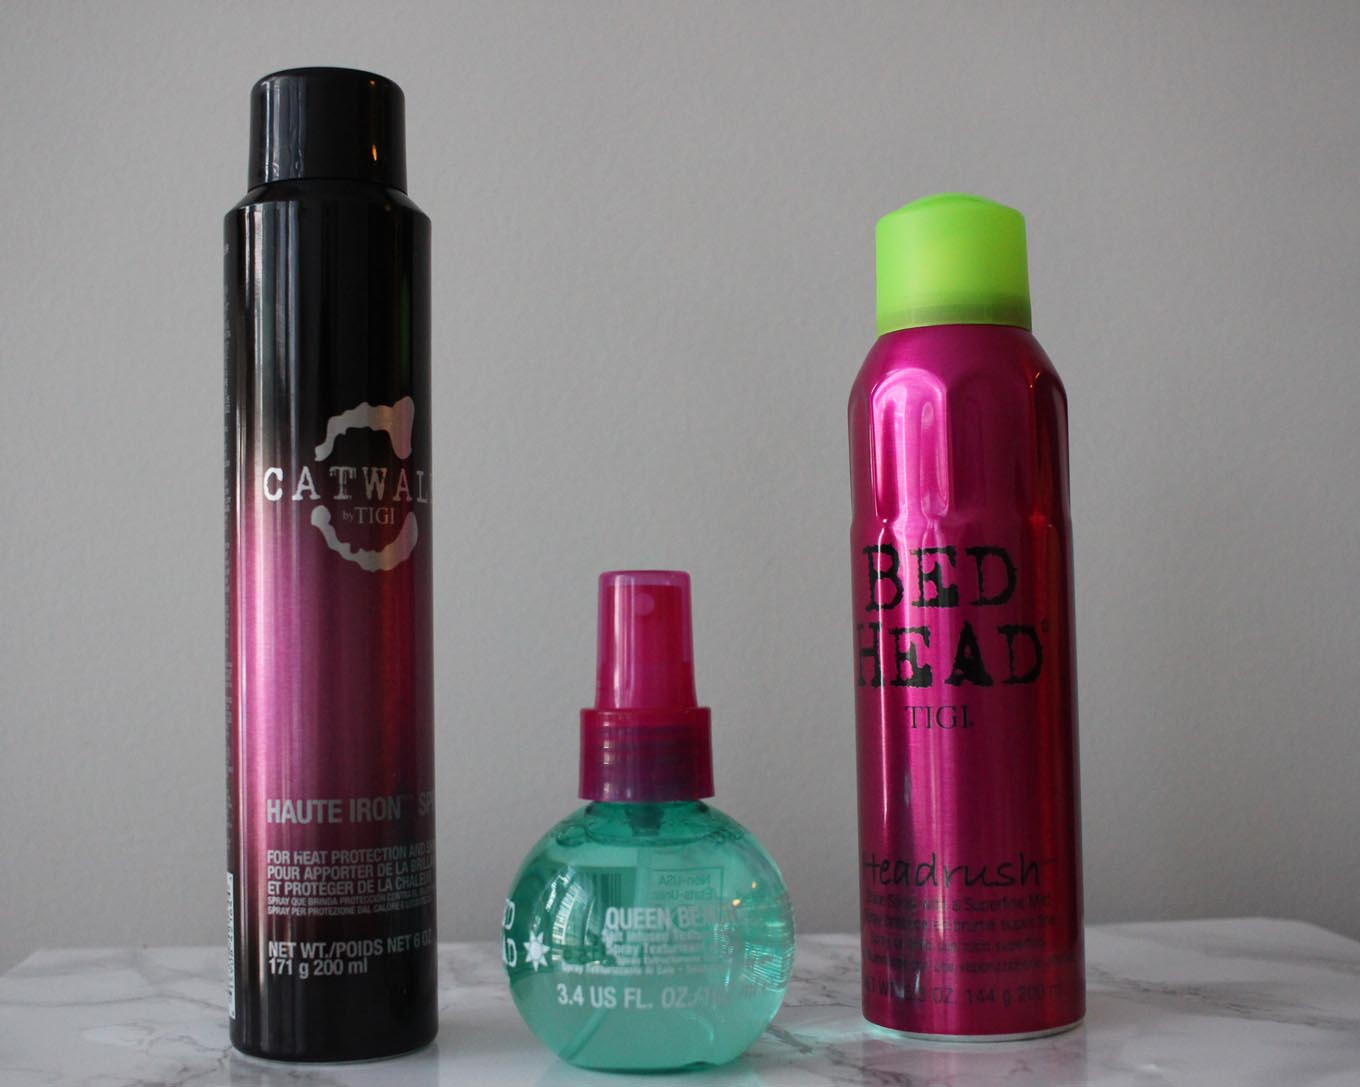 Lifestyle blogger Roxanne of Glass of Glam's review of Bed Head by TIGI hair products